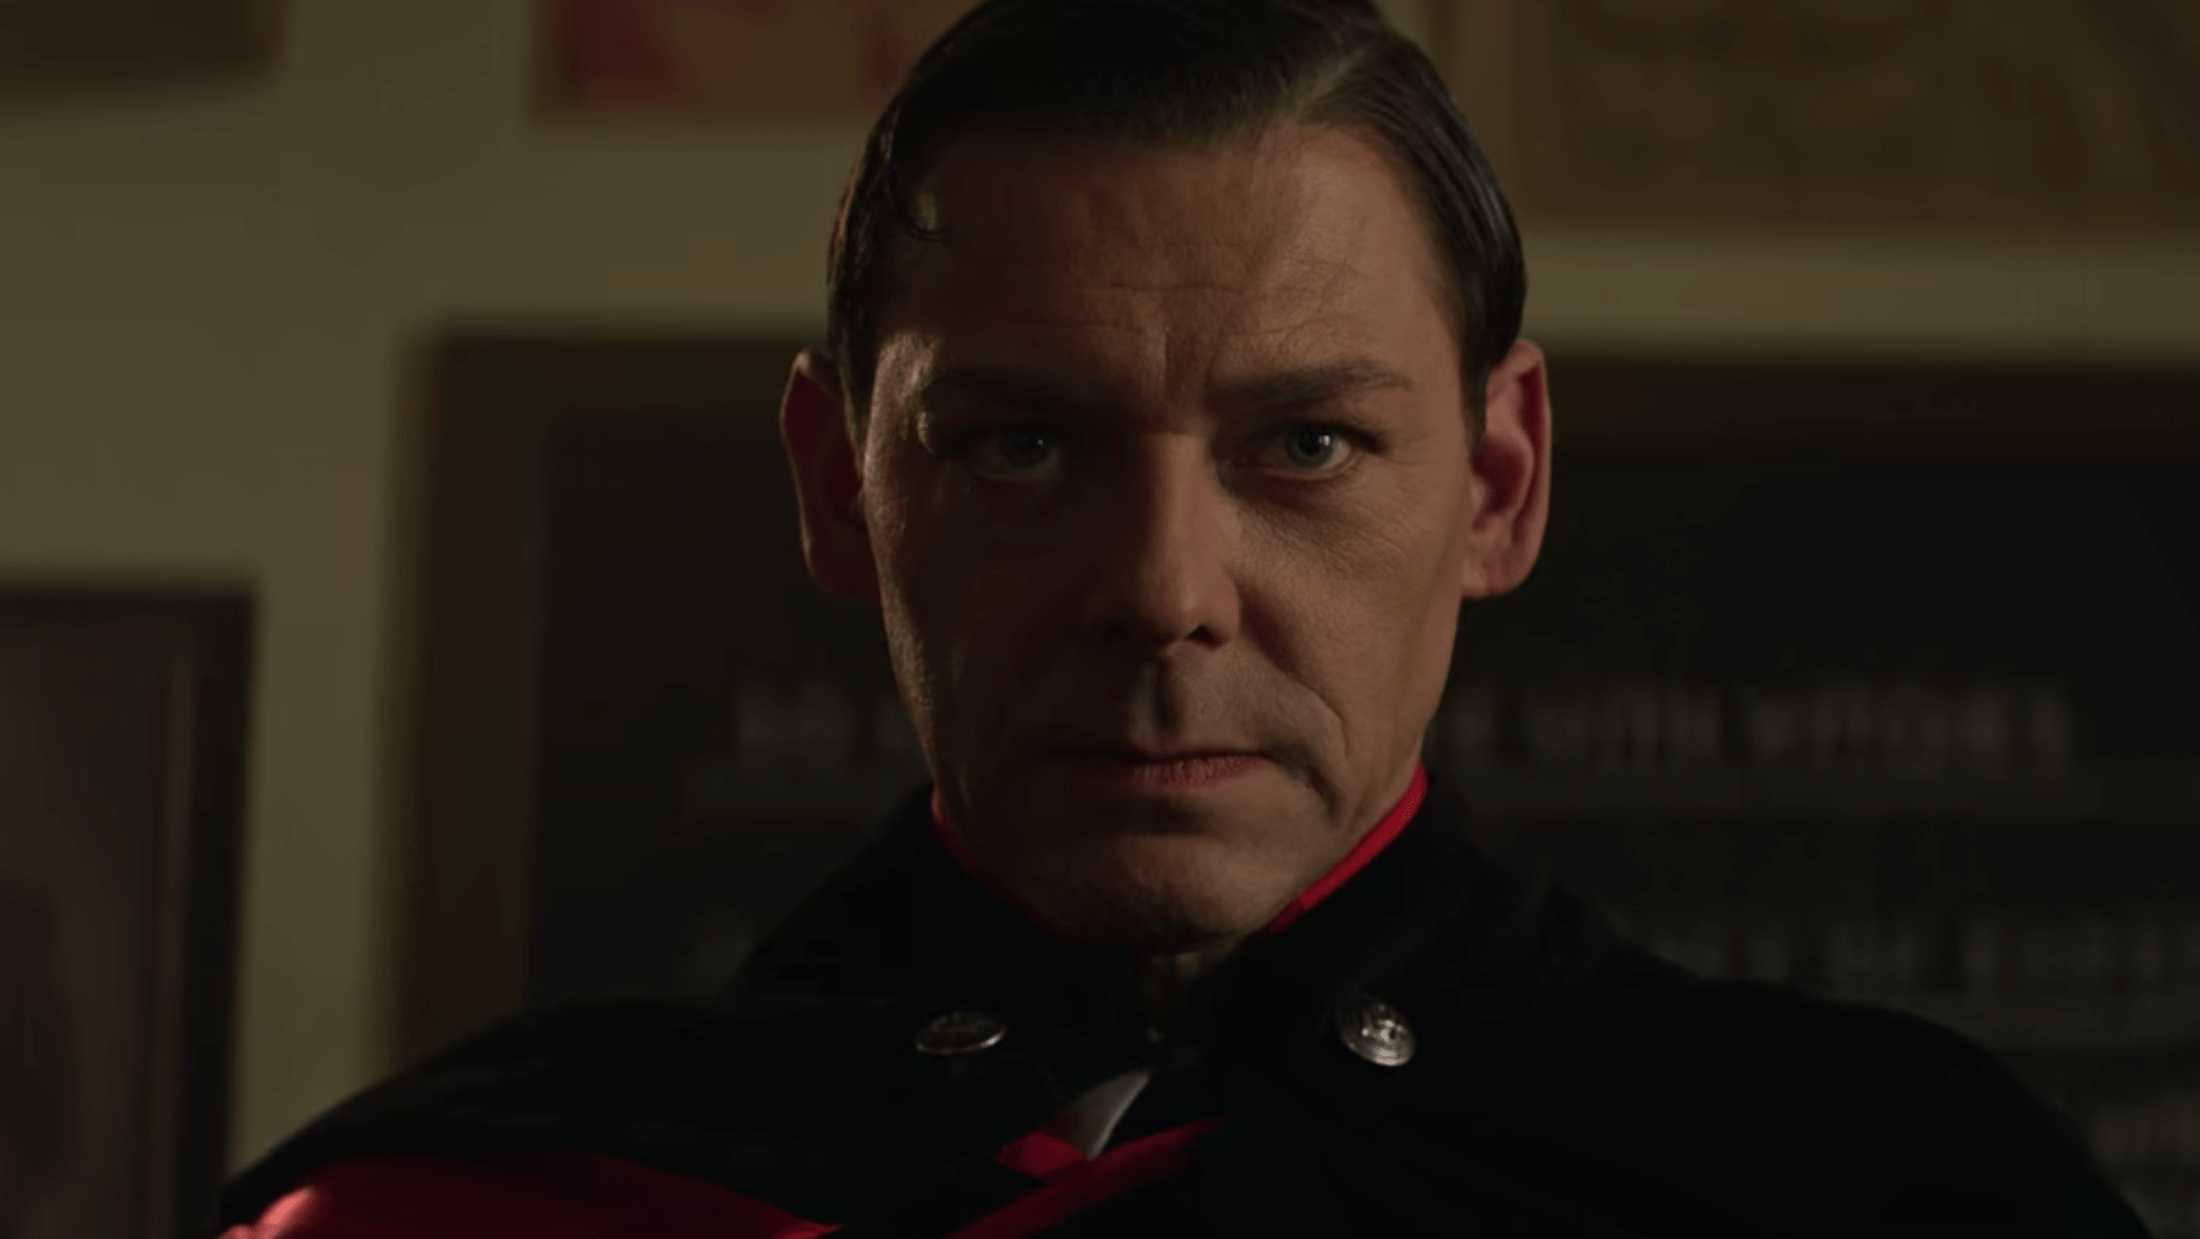 Father Blackwood's (Richard Coyle) only contribution to the story was some wish fulfillment. (Image: Netflix)